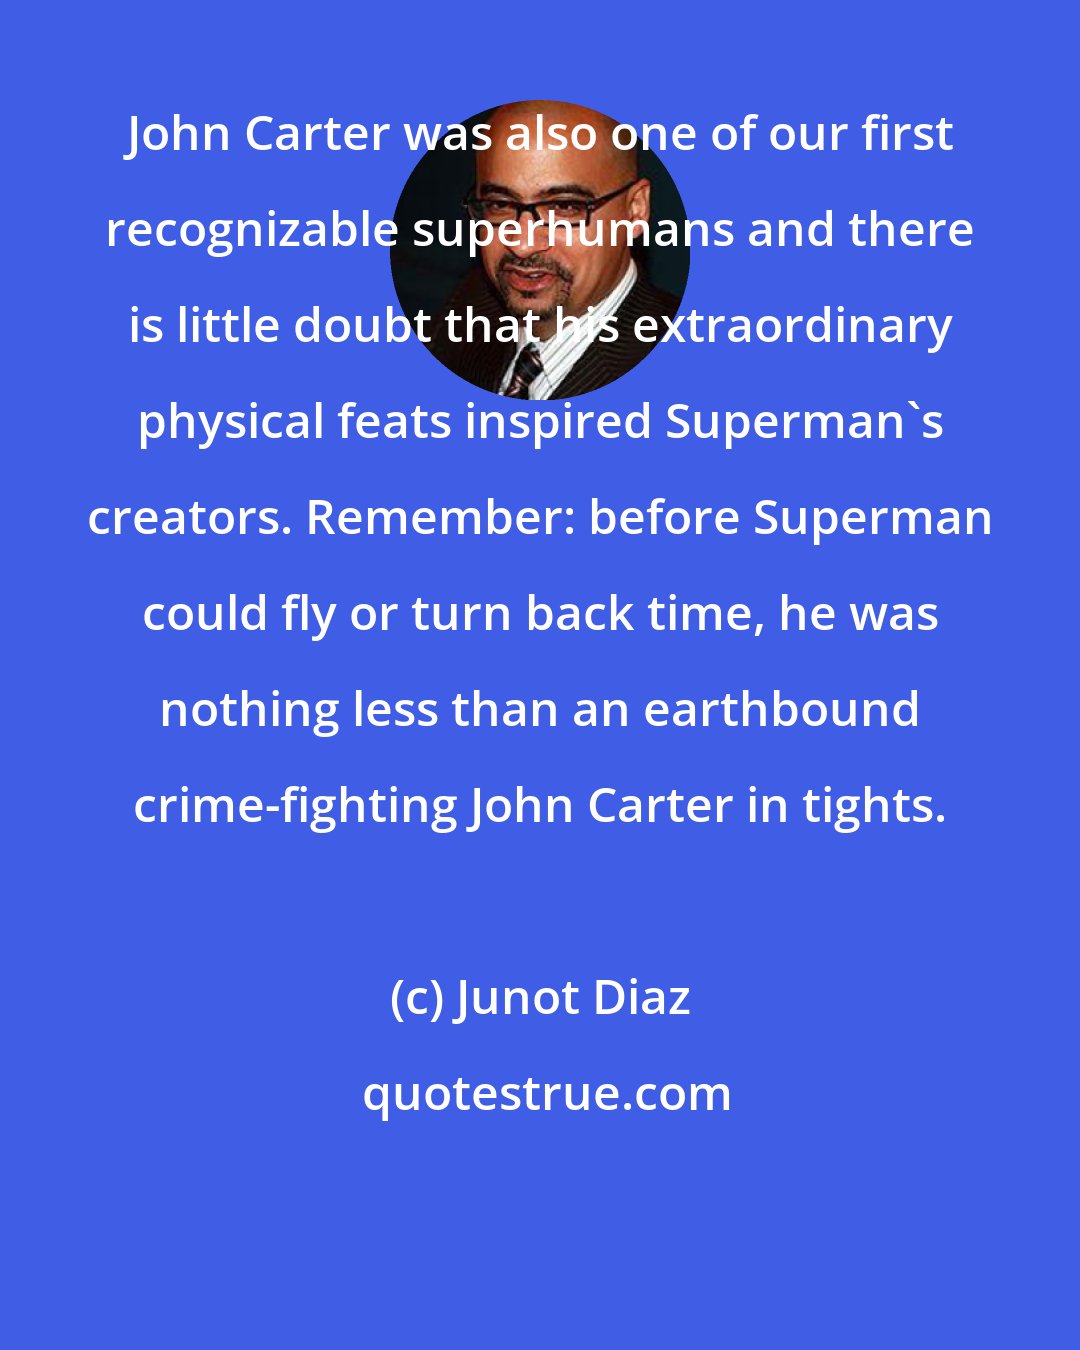 Junot Diaz: John Carter was also one of our first recognizable superhumans and there is little doubt that his extraordinary physical feats inspired Superman's creators. Remember: before Superman could fly or turn back time, he was nothing less than an earthbound crime-fighting John Carter in tights.